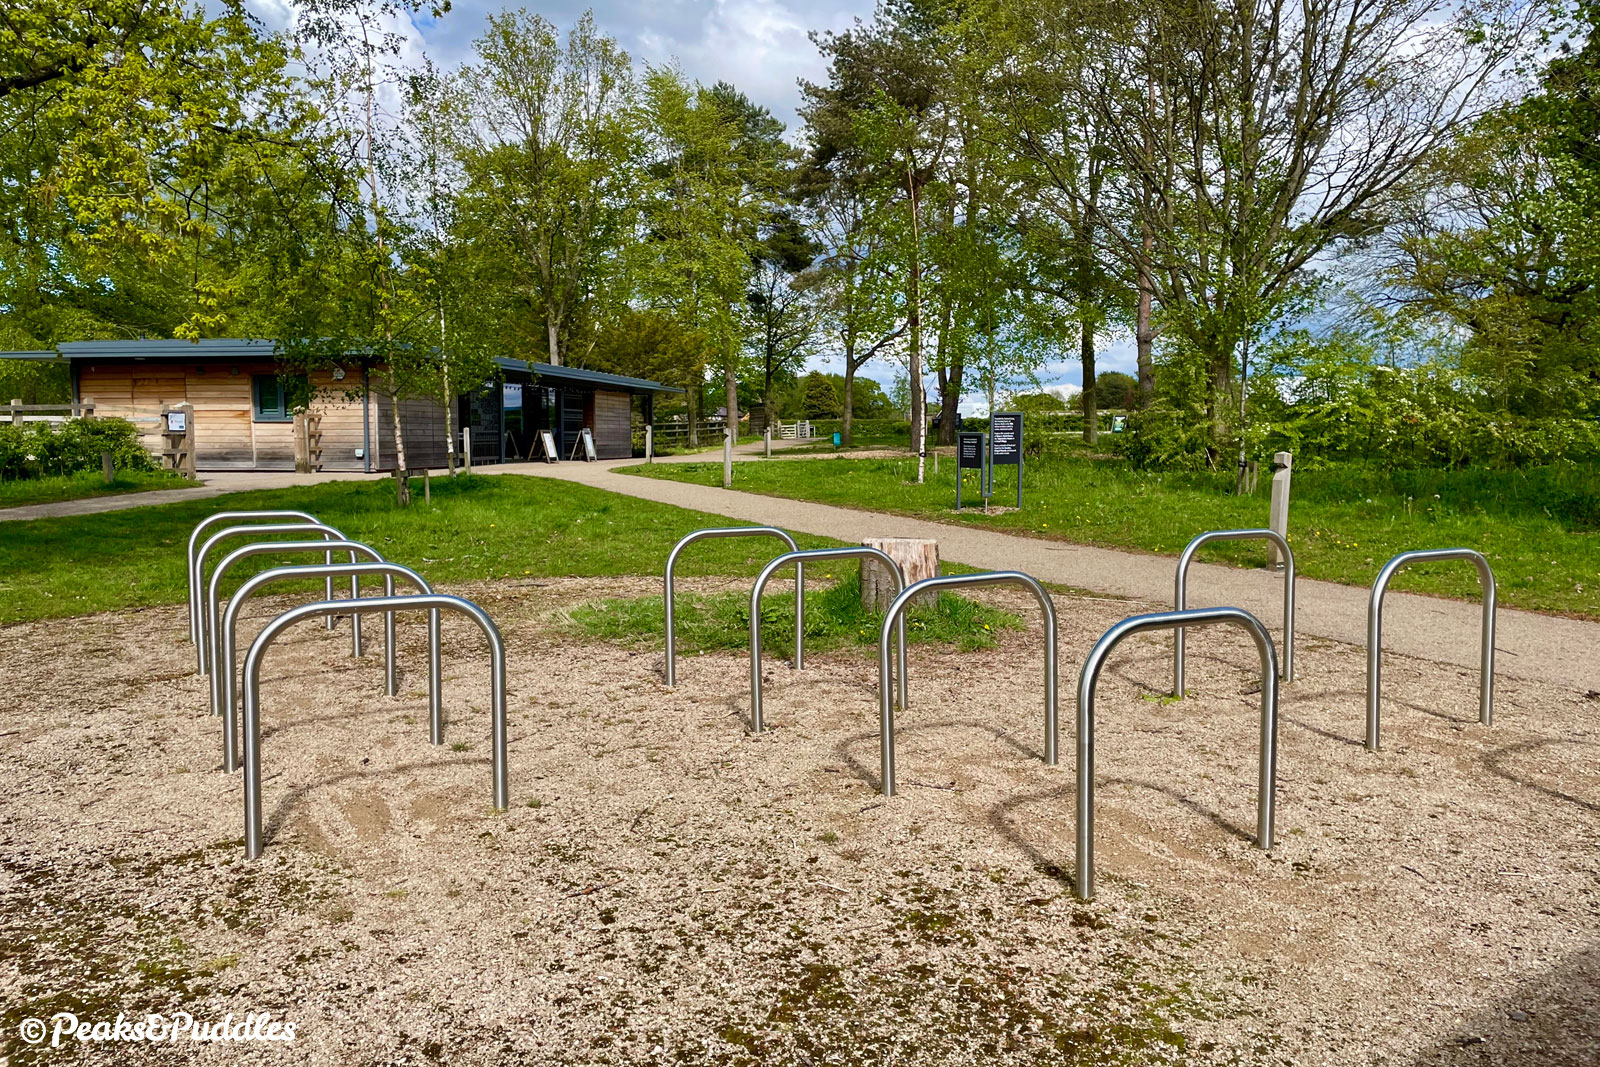 A good quantity of uncovered cycle parking stands have been provided in front of the new visitor welcome building, the best place to leave your bike if you plan to visit inside the mill.